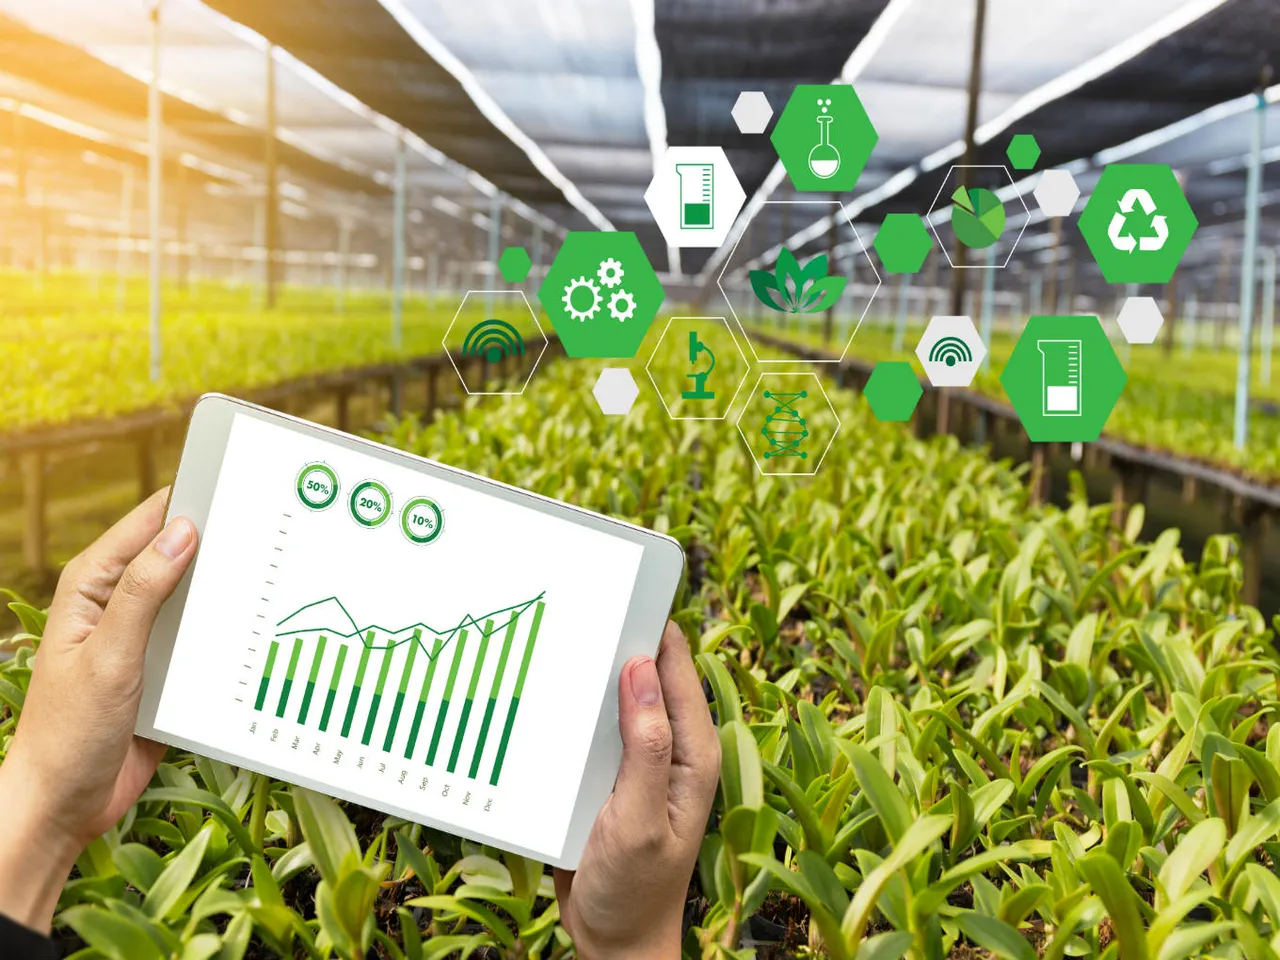 Cisco Join Hands with The/Nudge to Mobilize AgriTech Startup Ecosystem in India